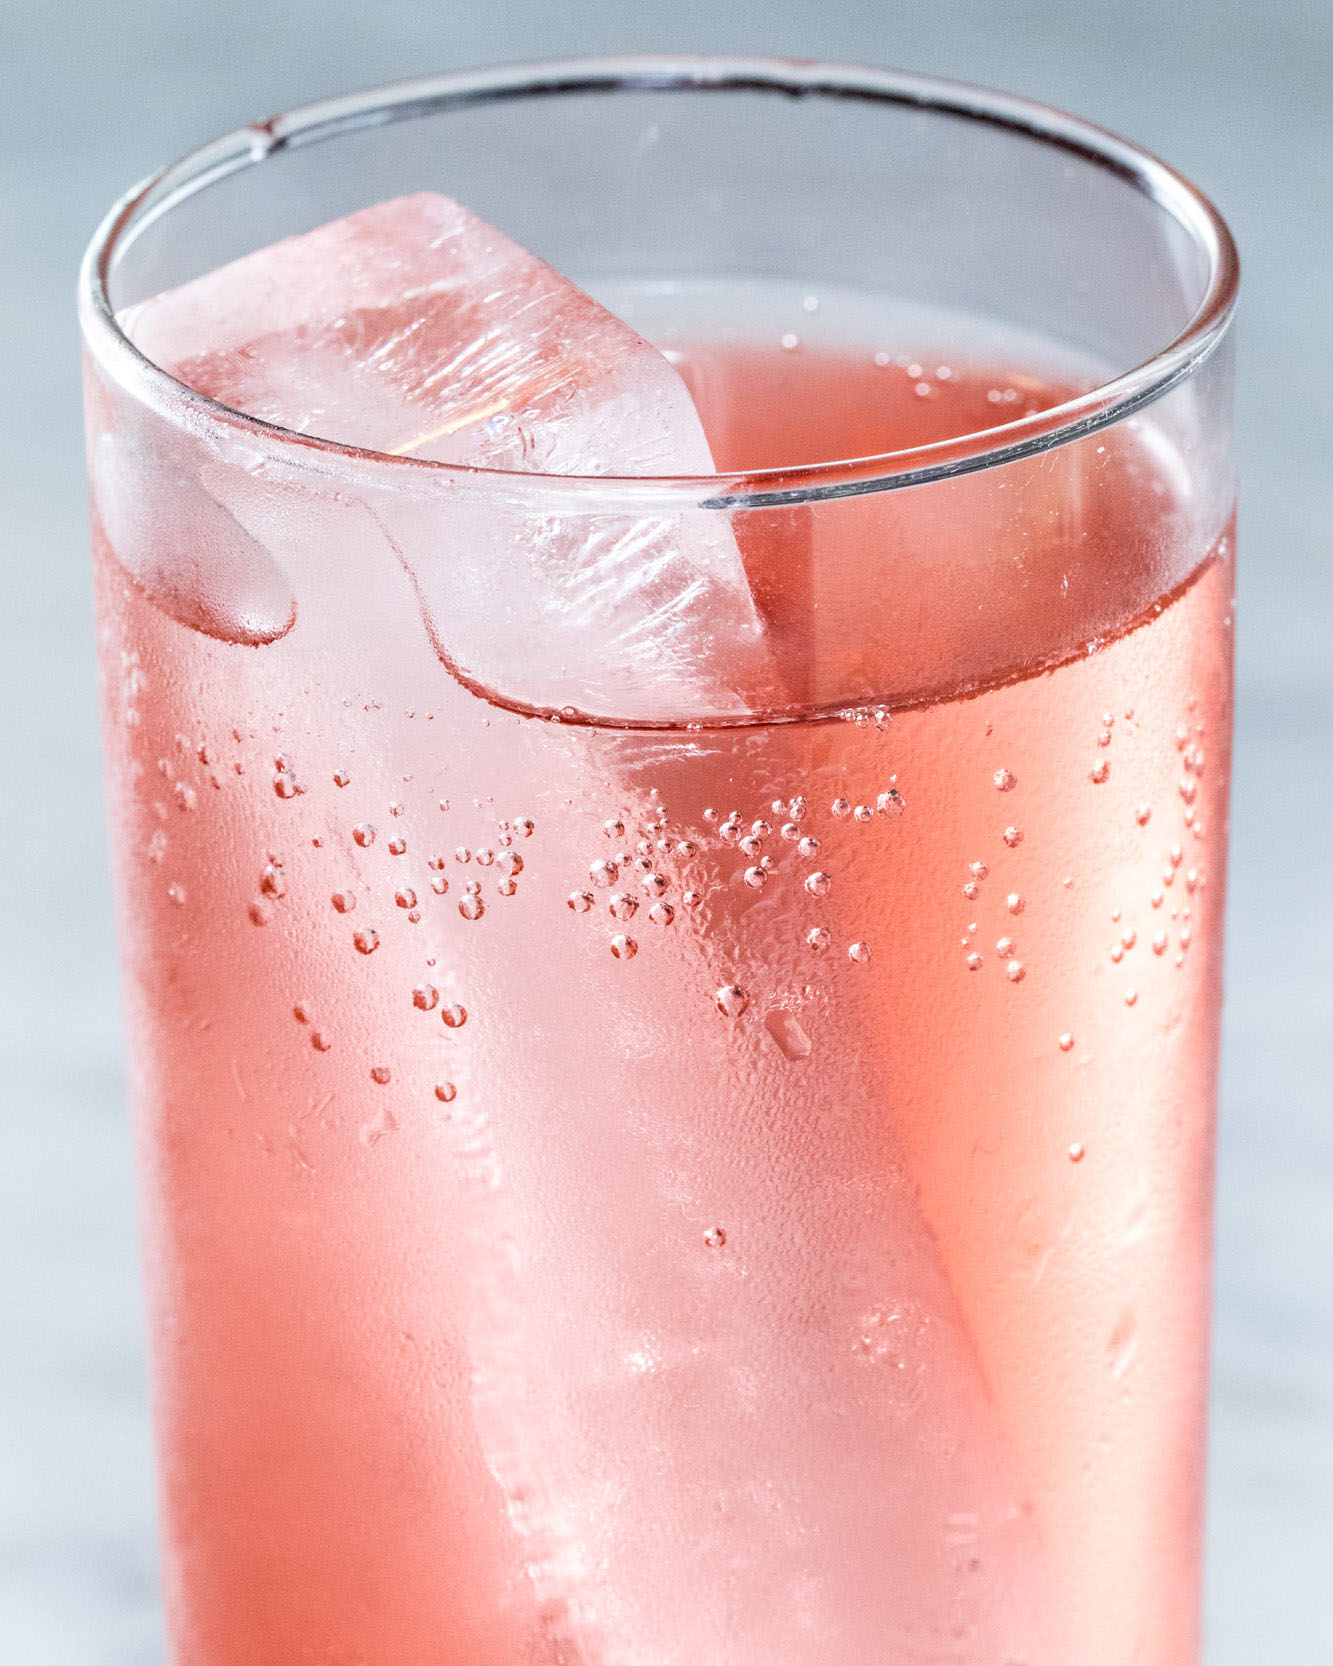 detail photograph of a drink with an icecube and carbonated bubbles